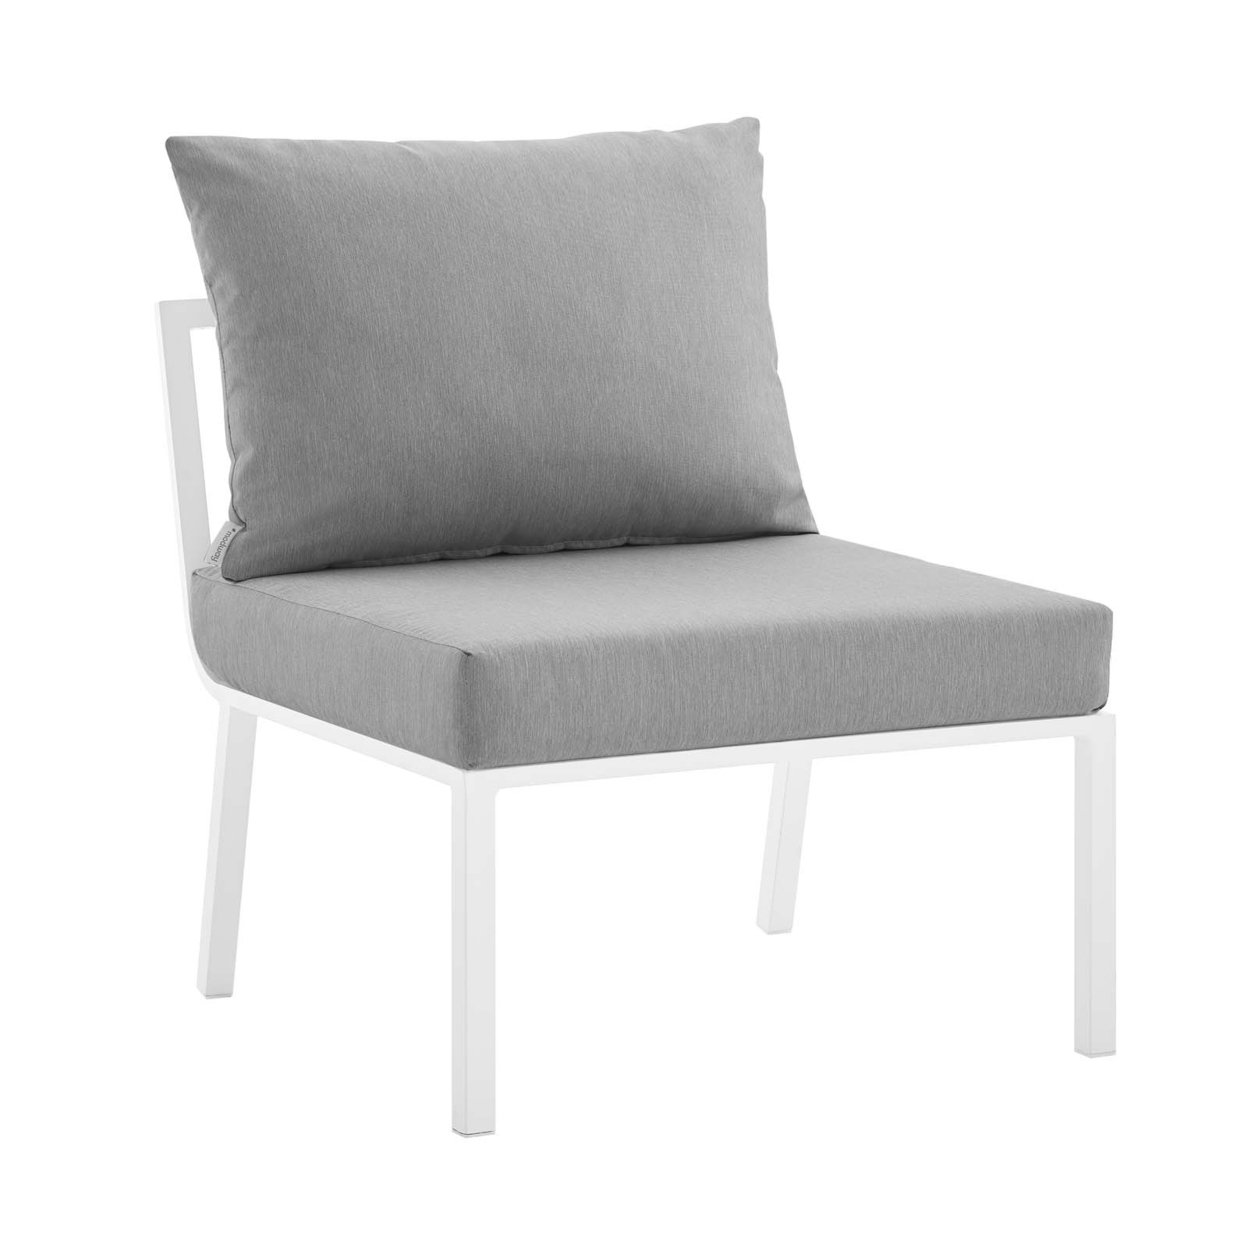 Riverside Outdoor Patio Aluminum Armless Chair,White Gray